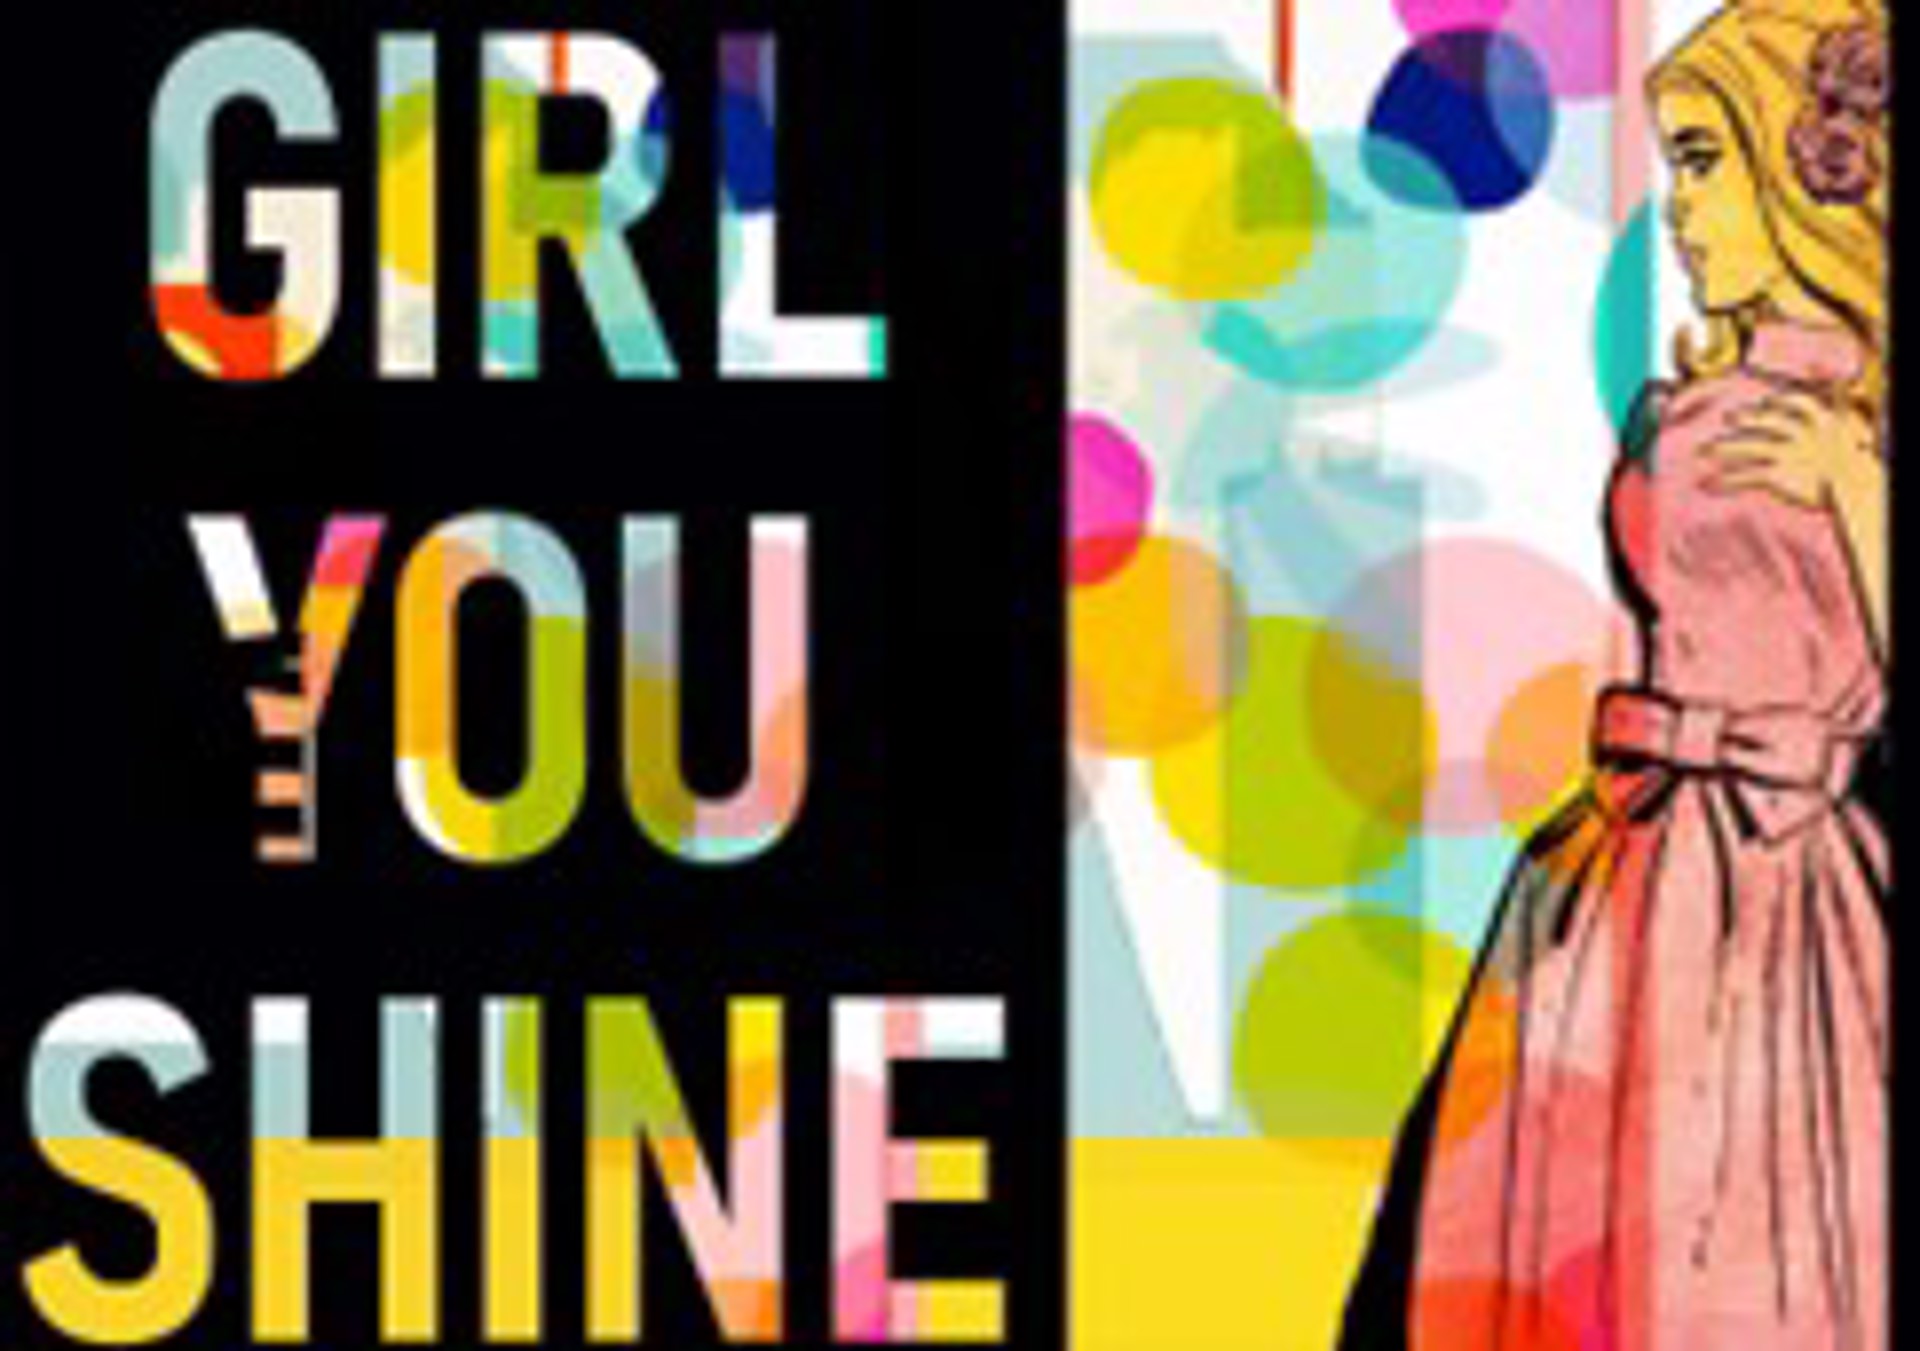 Girl, You Shine! by Sarah Collier